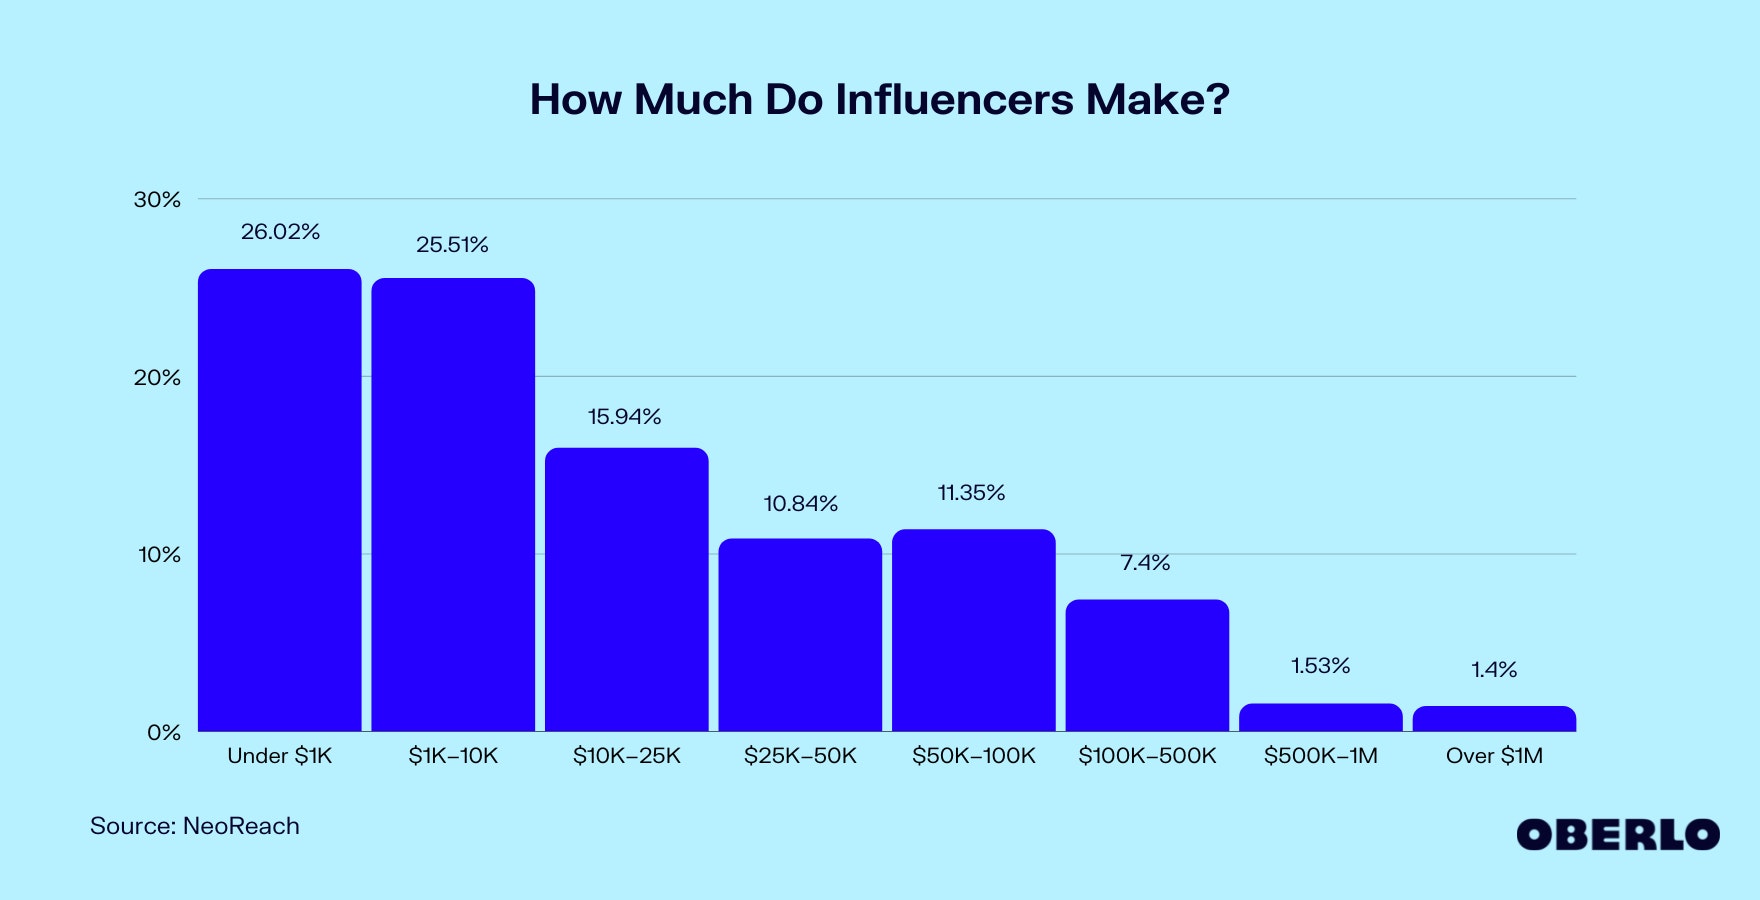 How Much Can You Make as an Influencer?